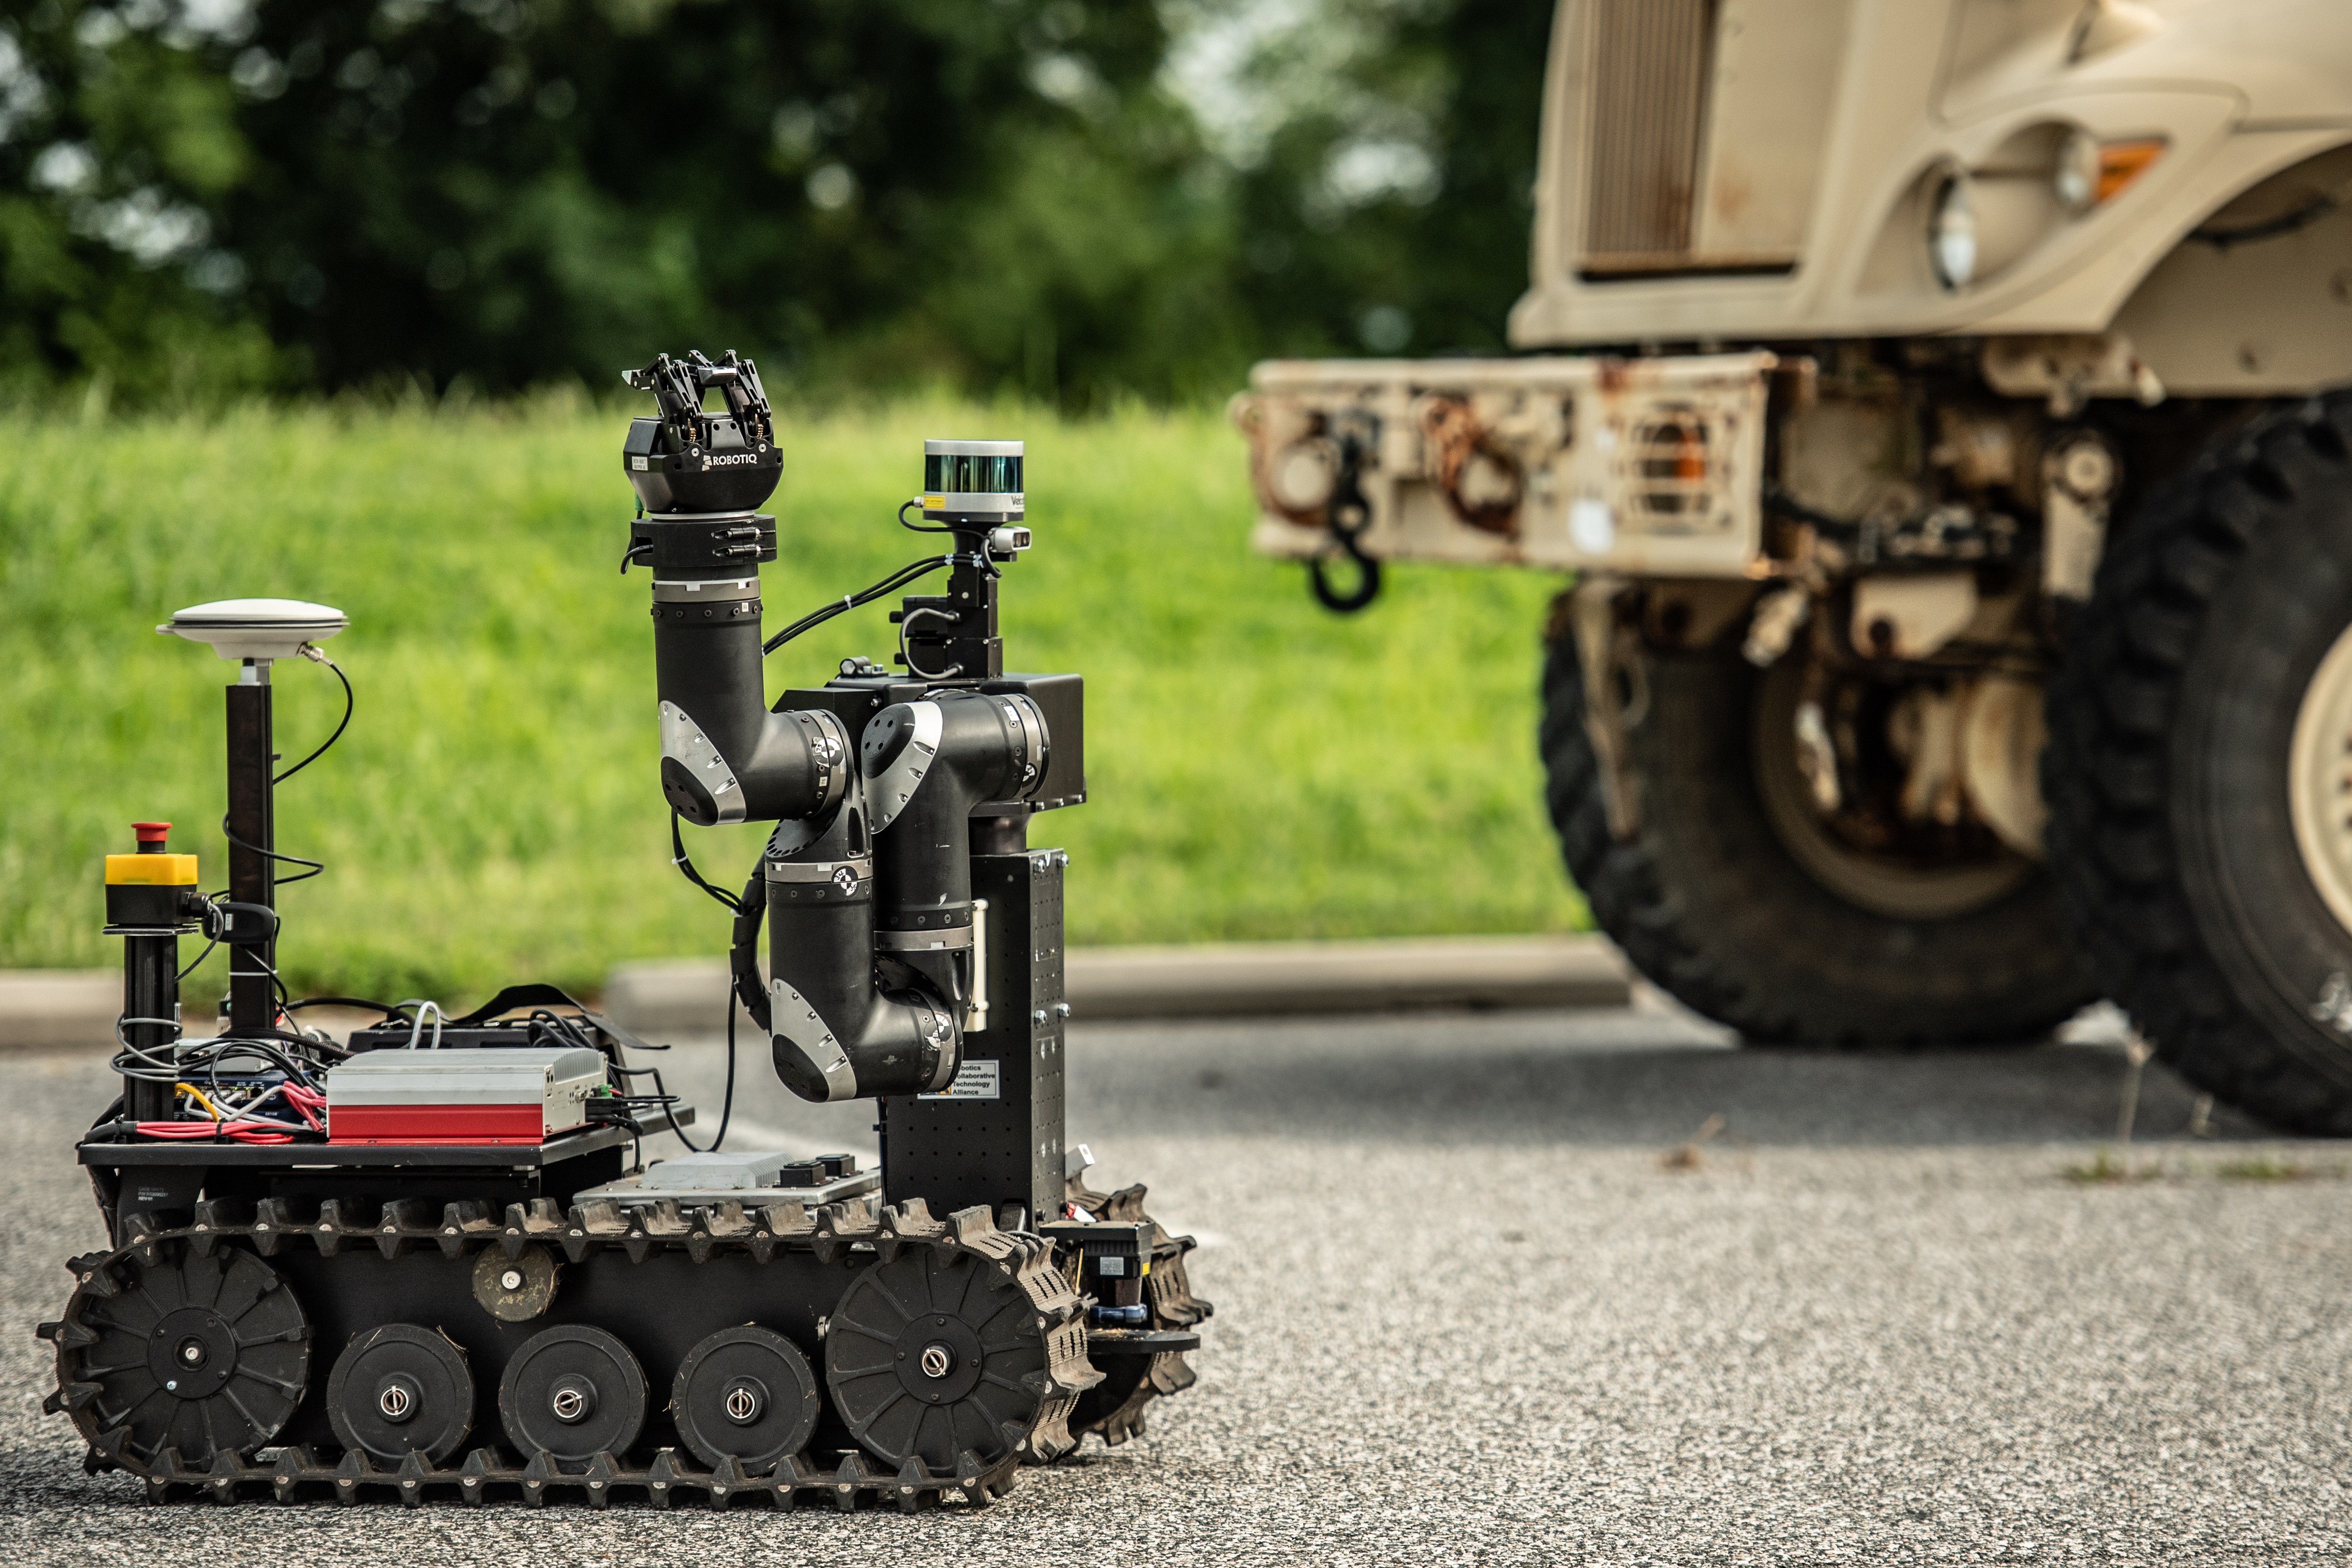 Snart hund Indvending Army researchers test human-like robots | Article | The United States Army